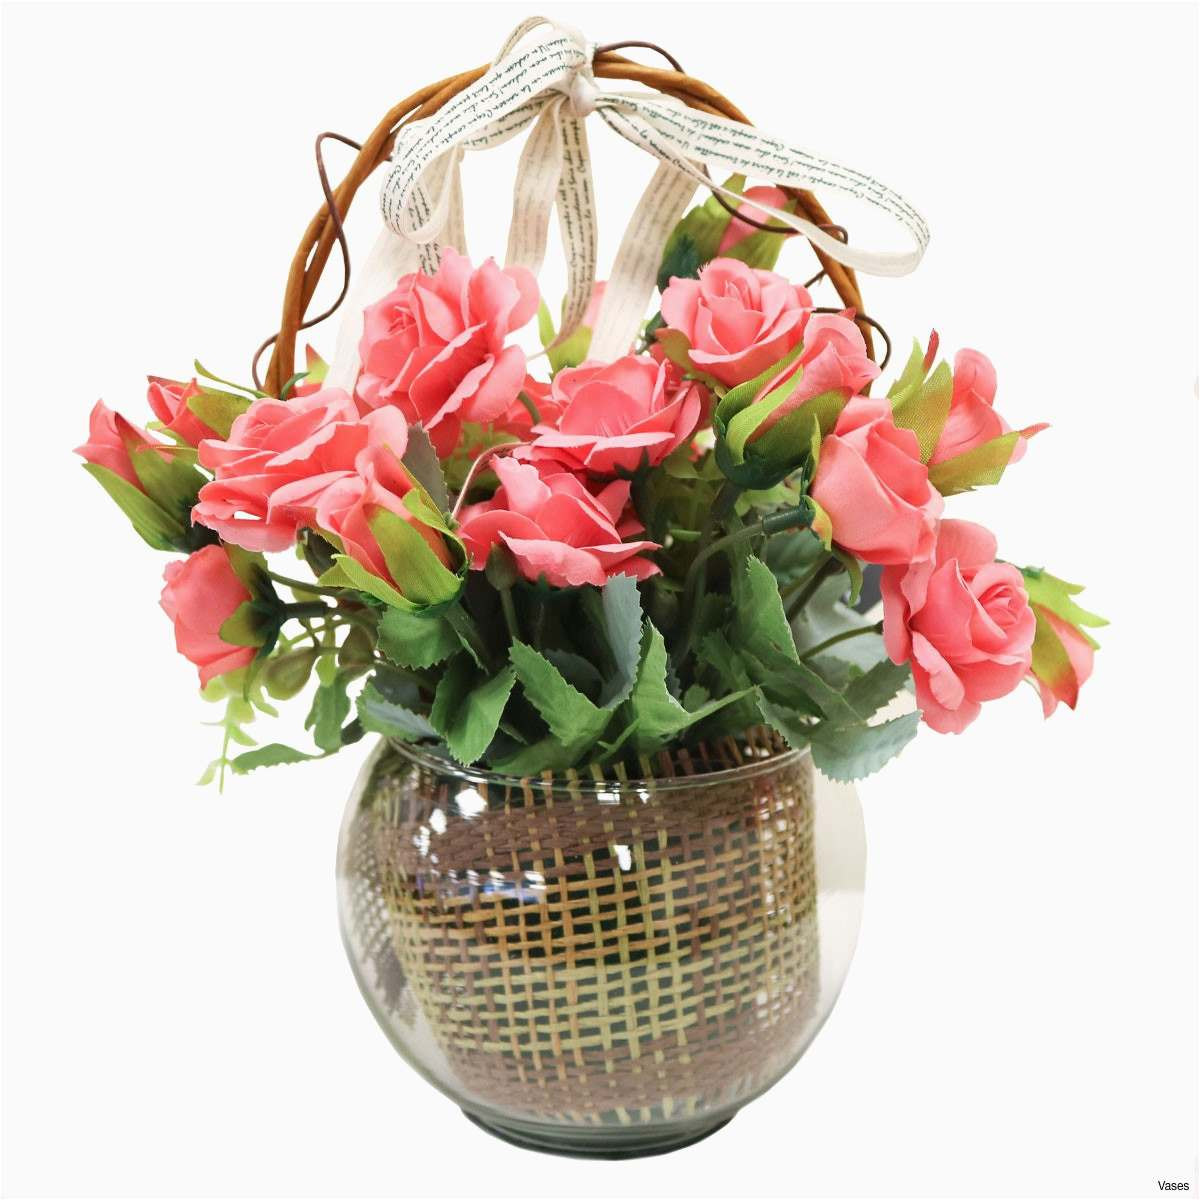 28 Fabulous Vase Of Peonies 2024 free download vase of peonies of christmas flowers amazing merry christmas sign coloring pages best with christmas flowers amazing bf142 11km 1200x1200h vases pink flower vase i 0d gold inspiration elegan